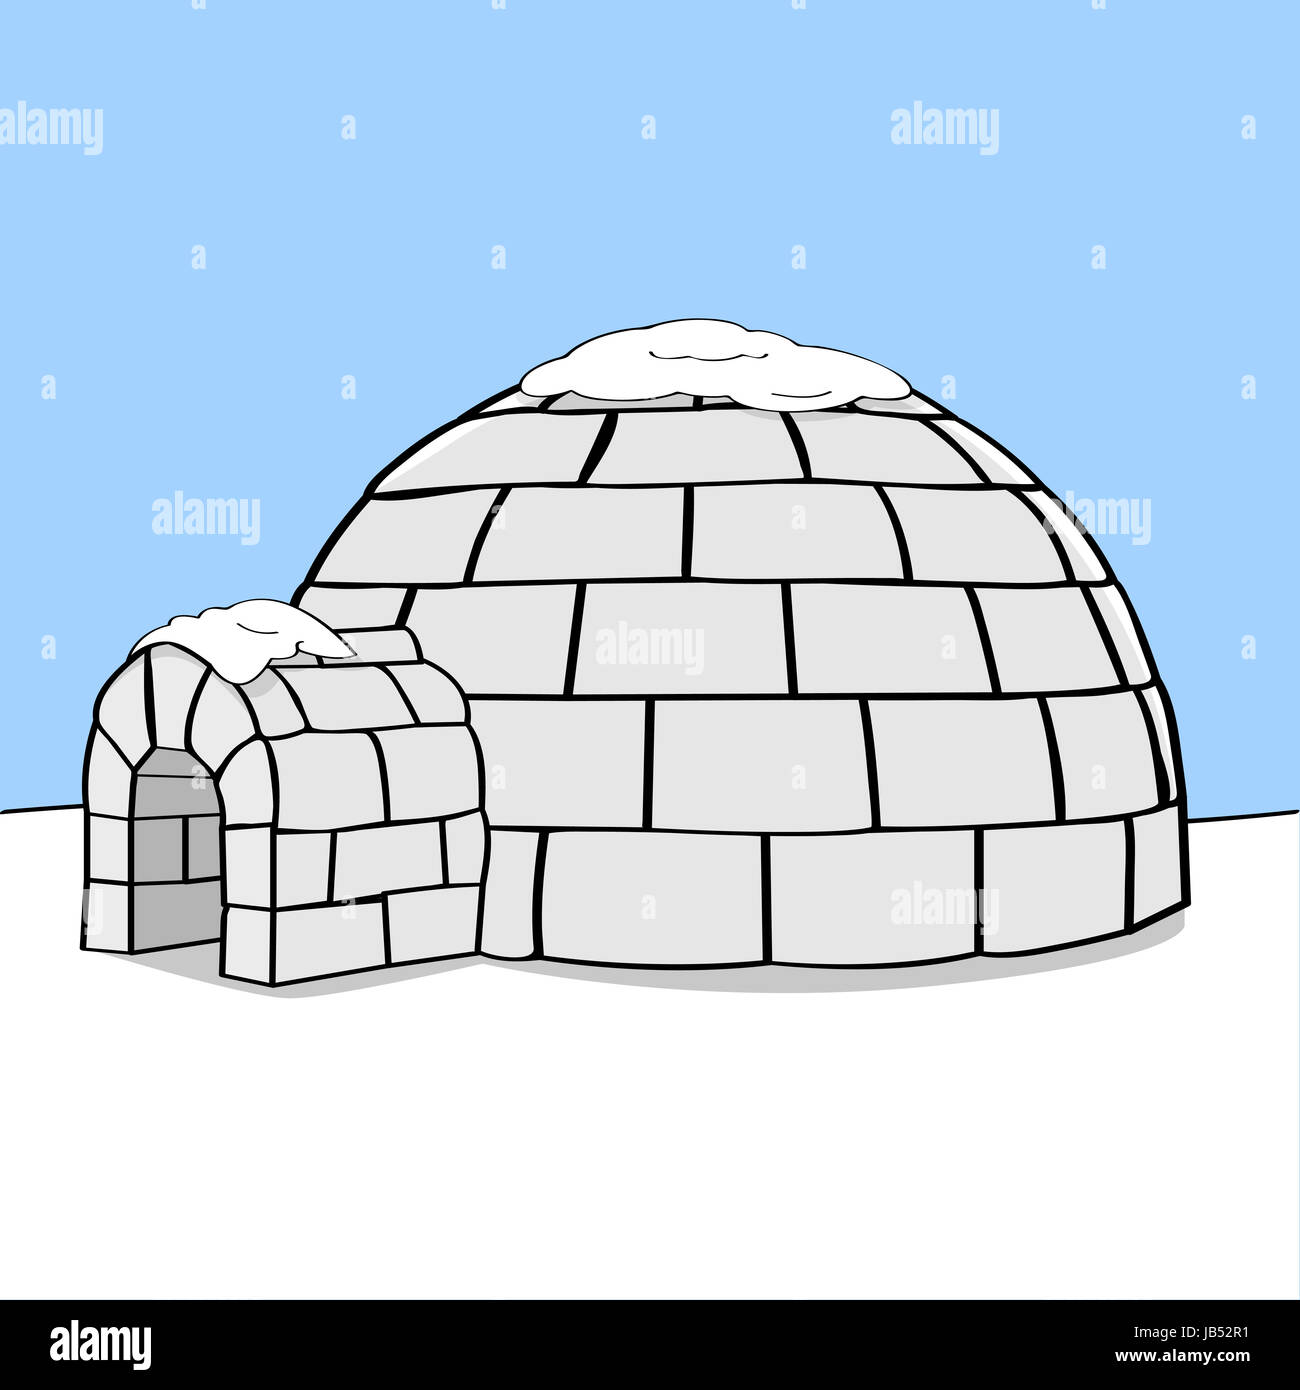 Cartoon Illustration Showing An Igloo In The Middle Of Nowhere With Stock Photo Alamy